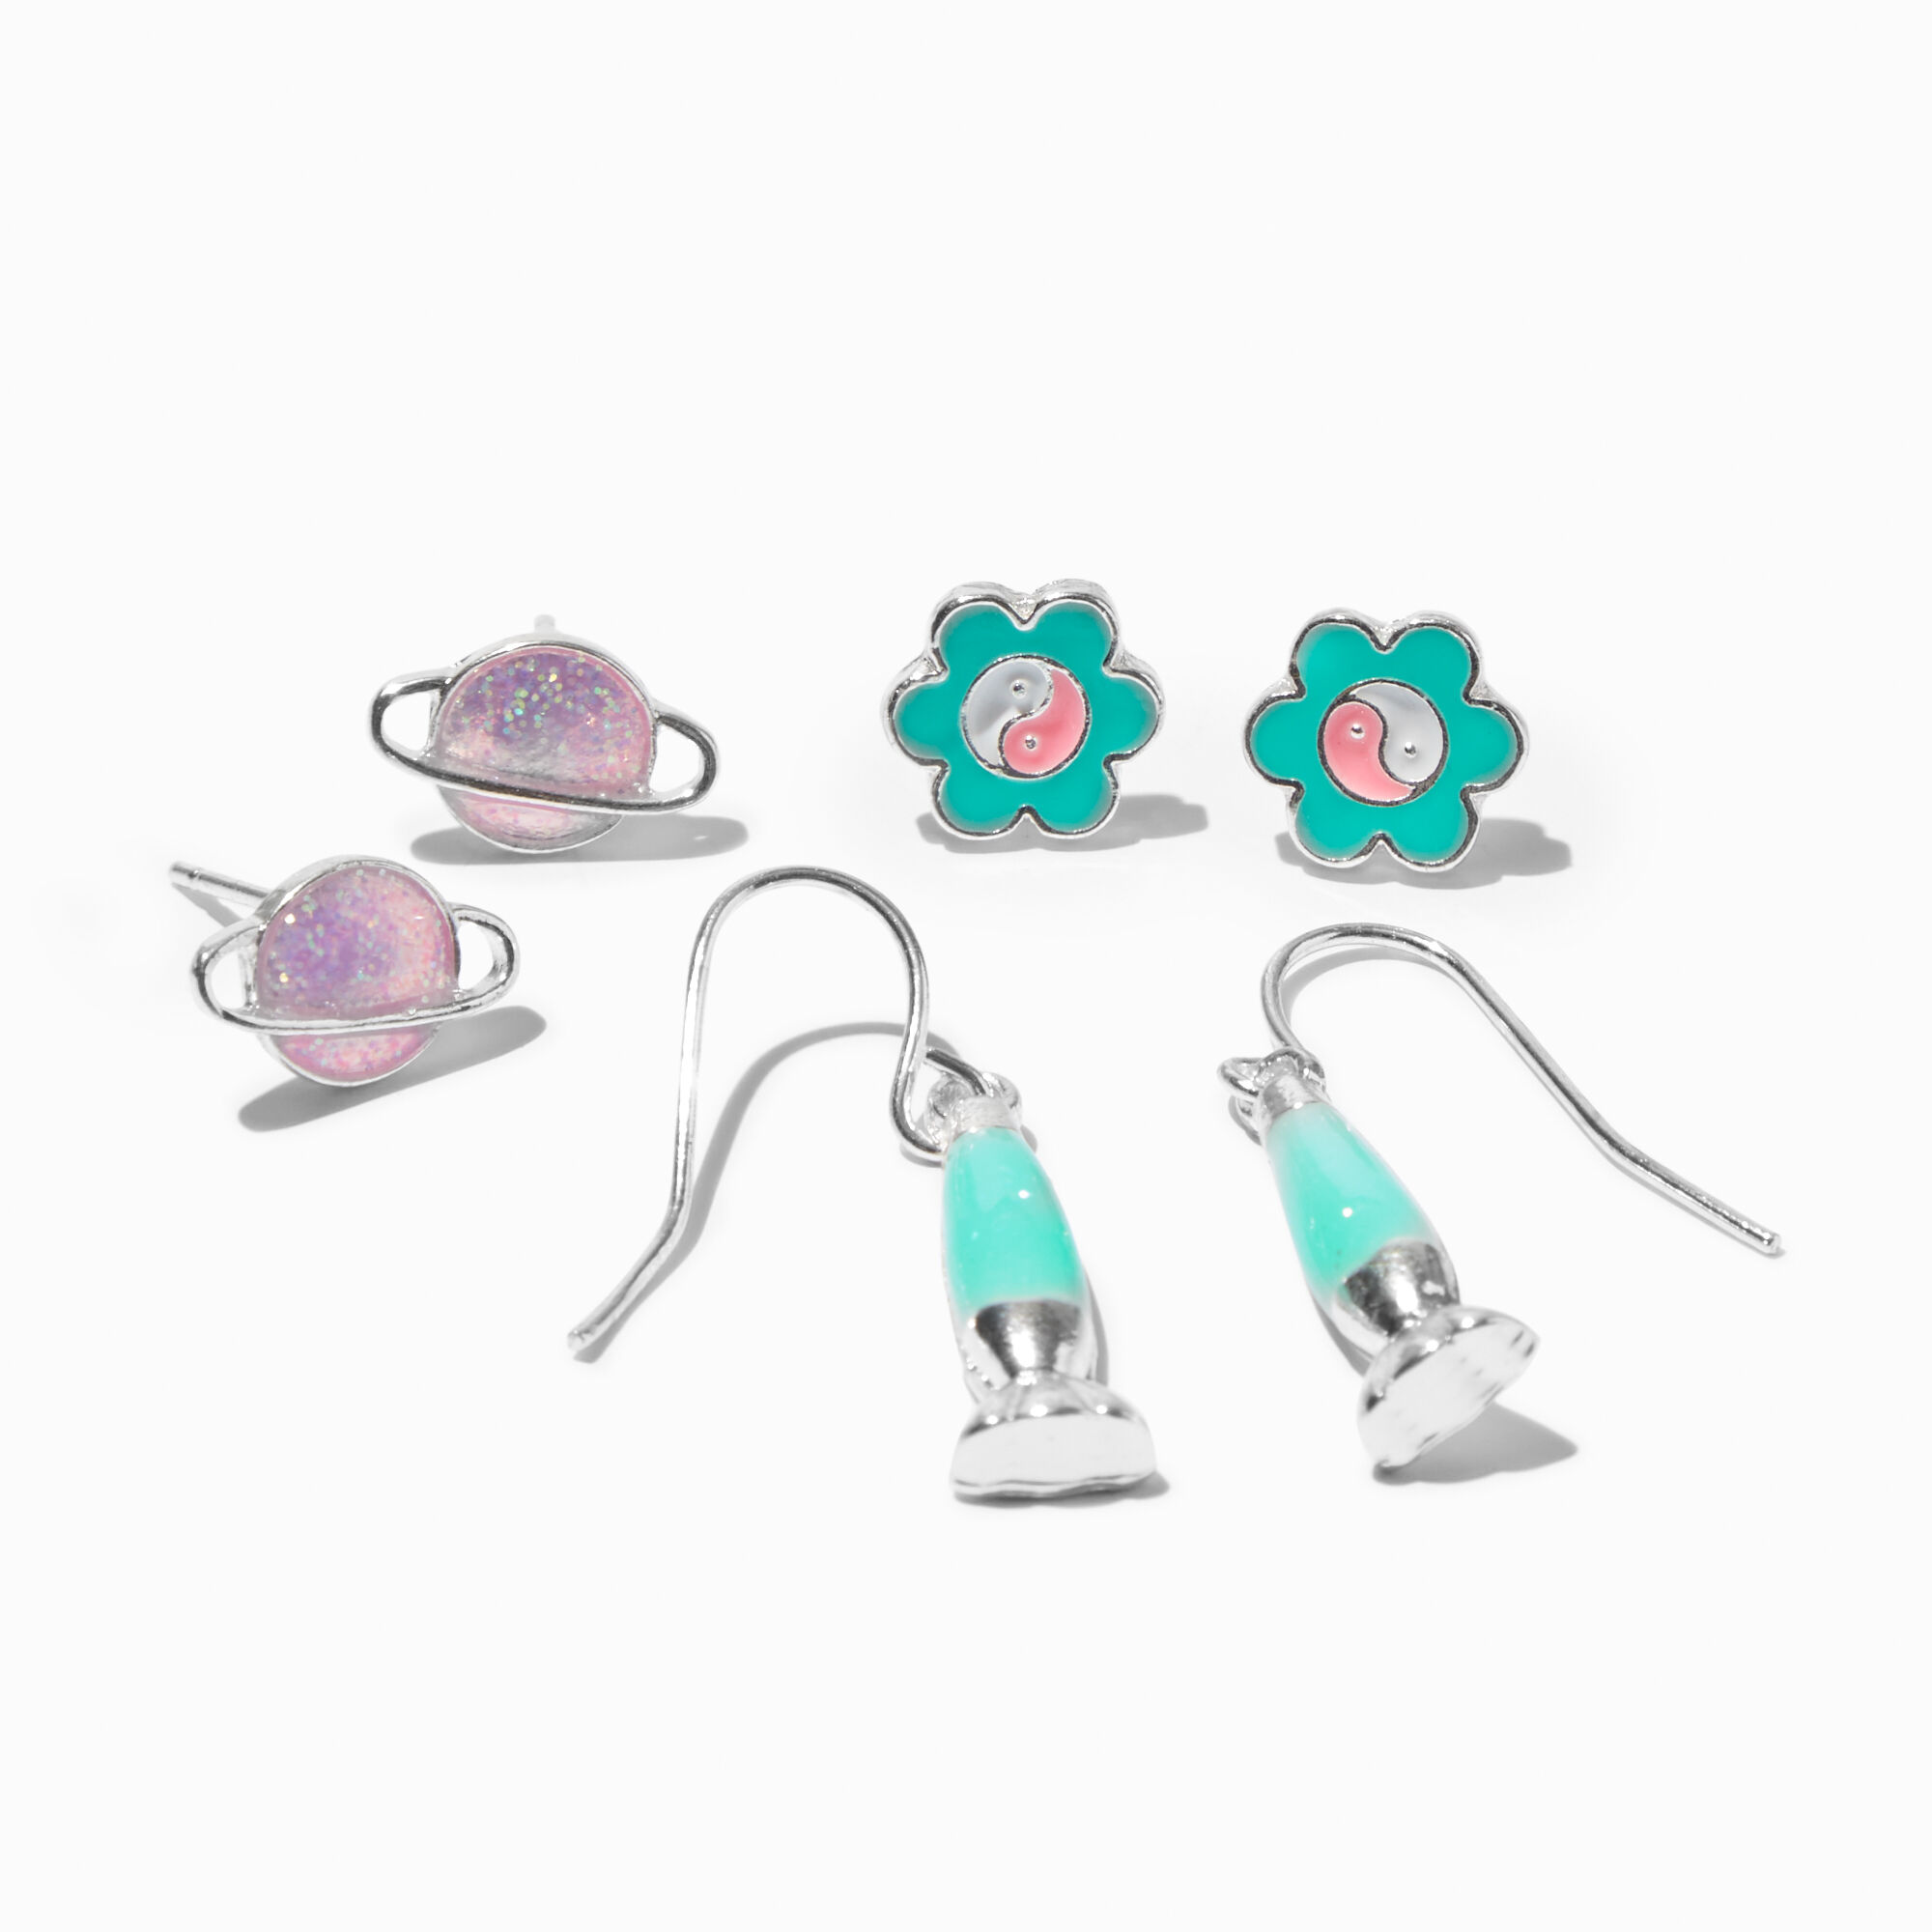 View Claires Lava Lamp Earrings Set 3 Pack Mint information